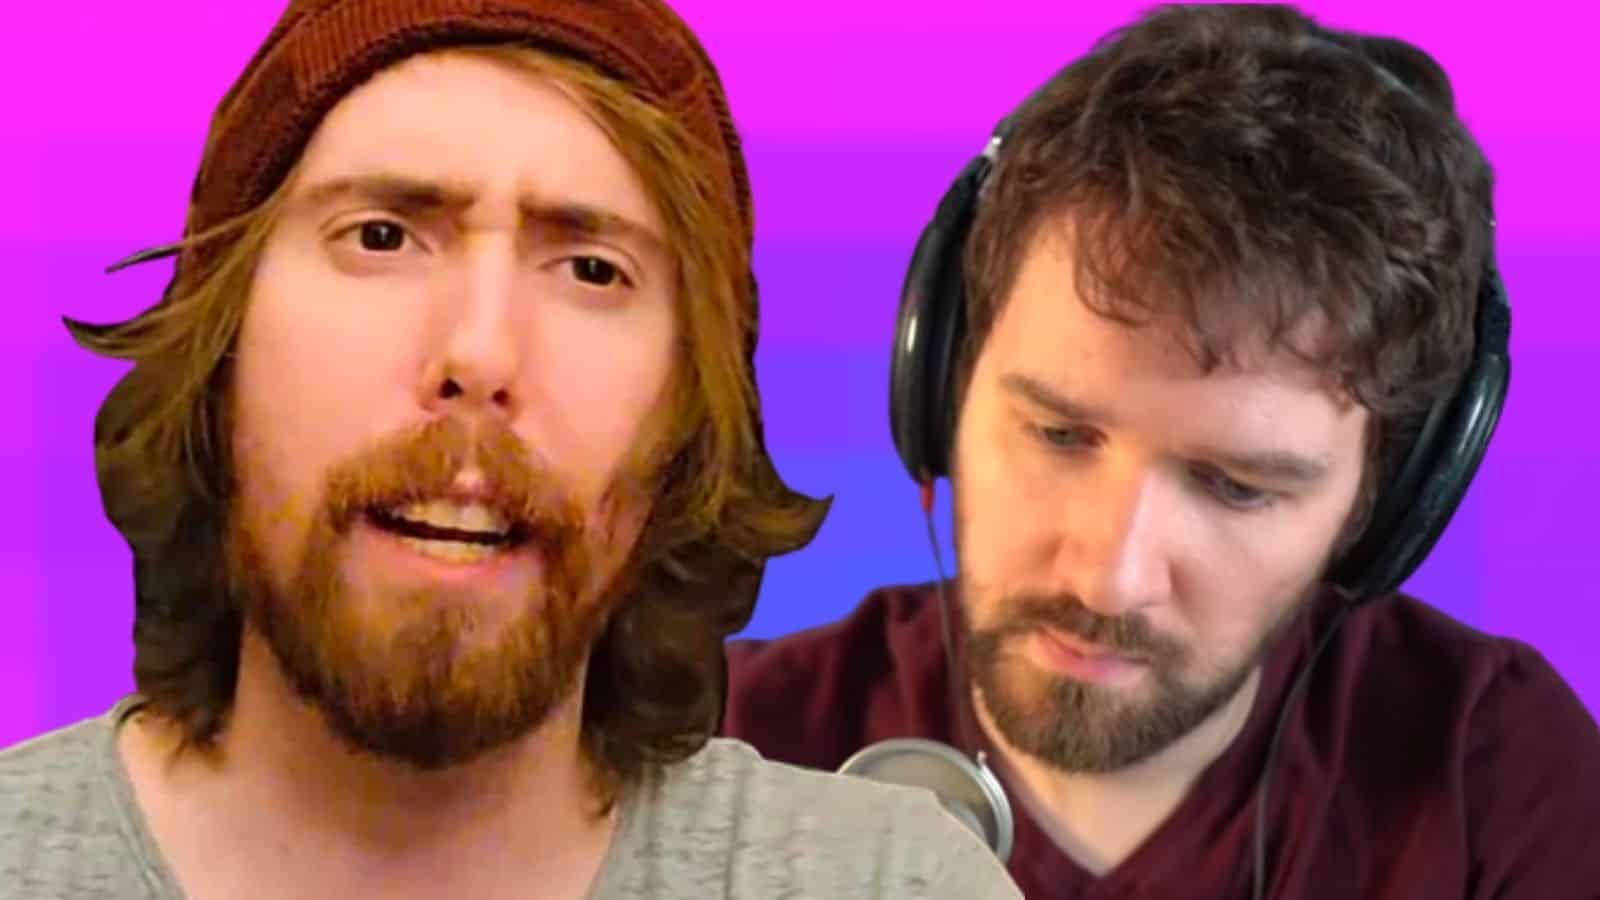 Asmongold and Destiny